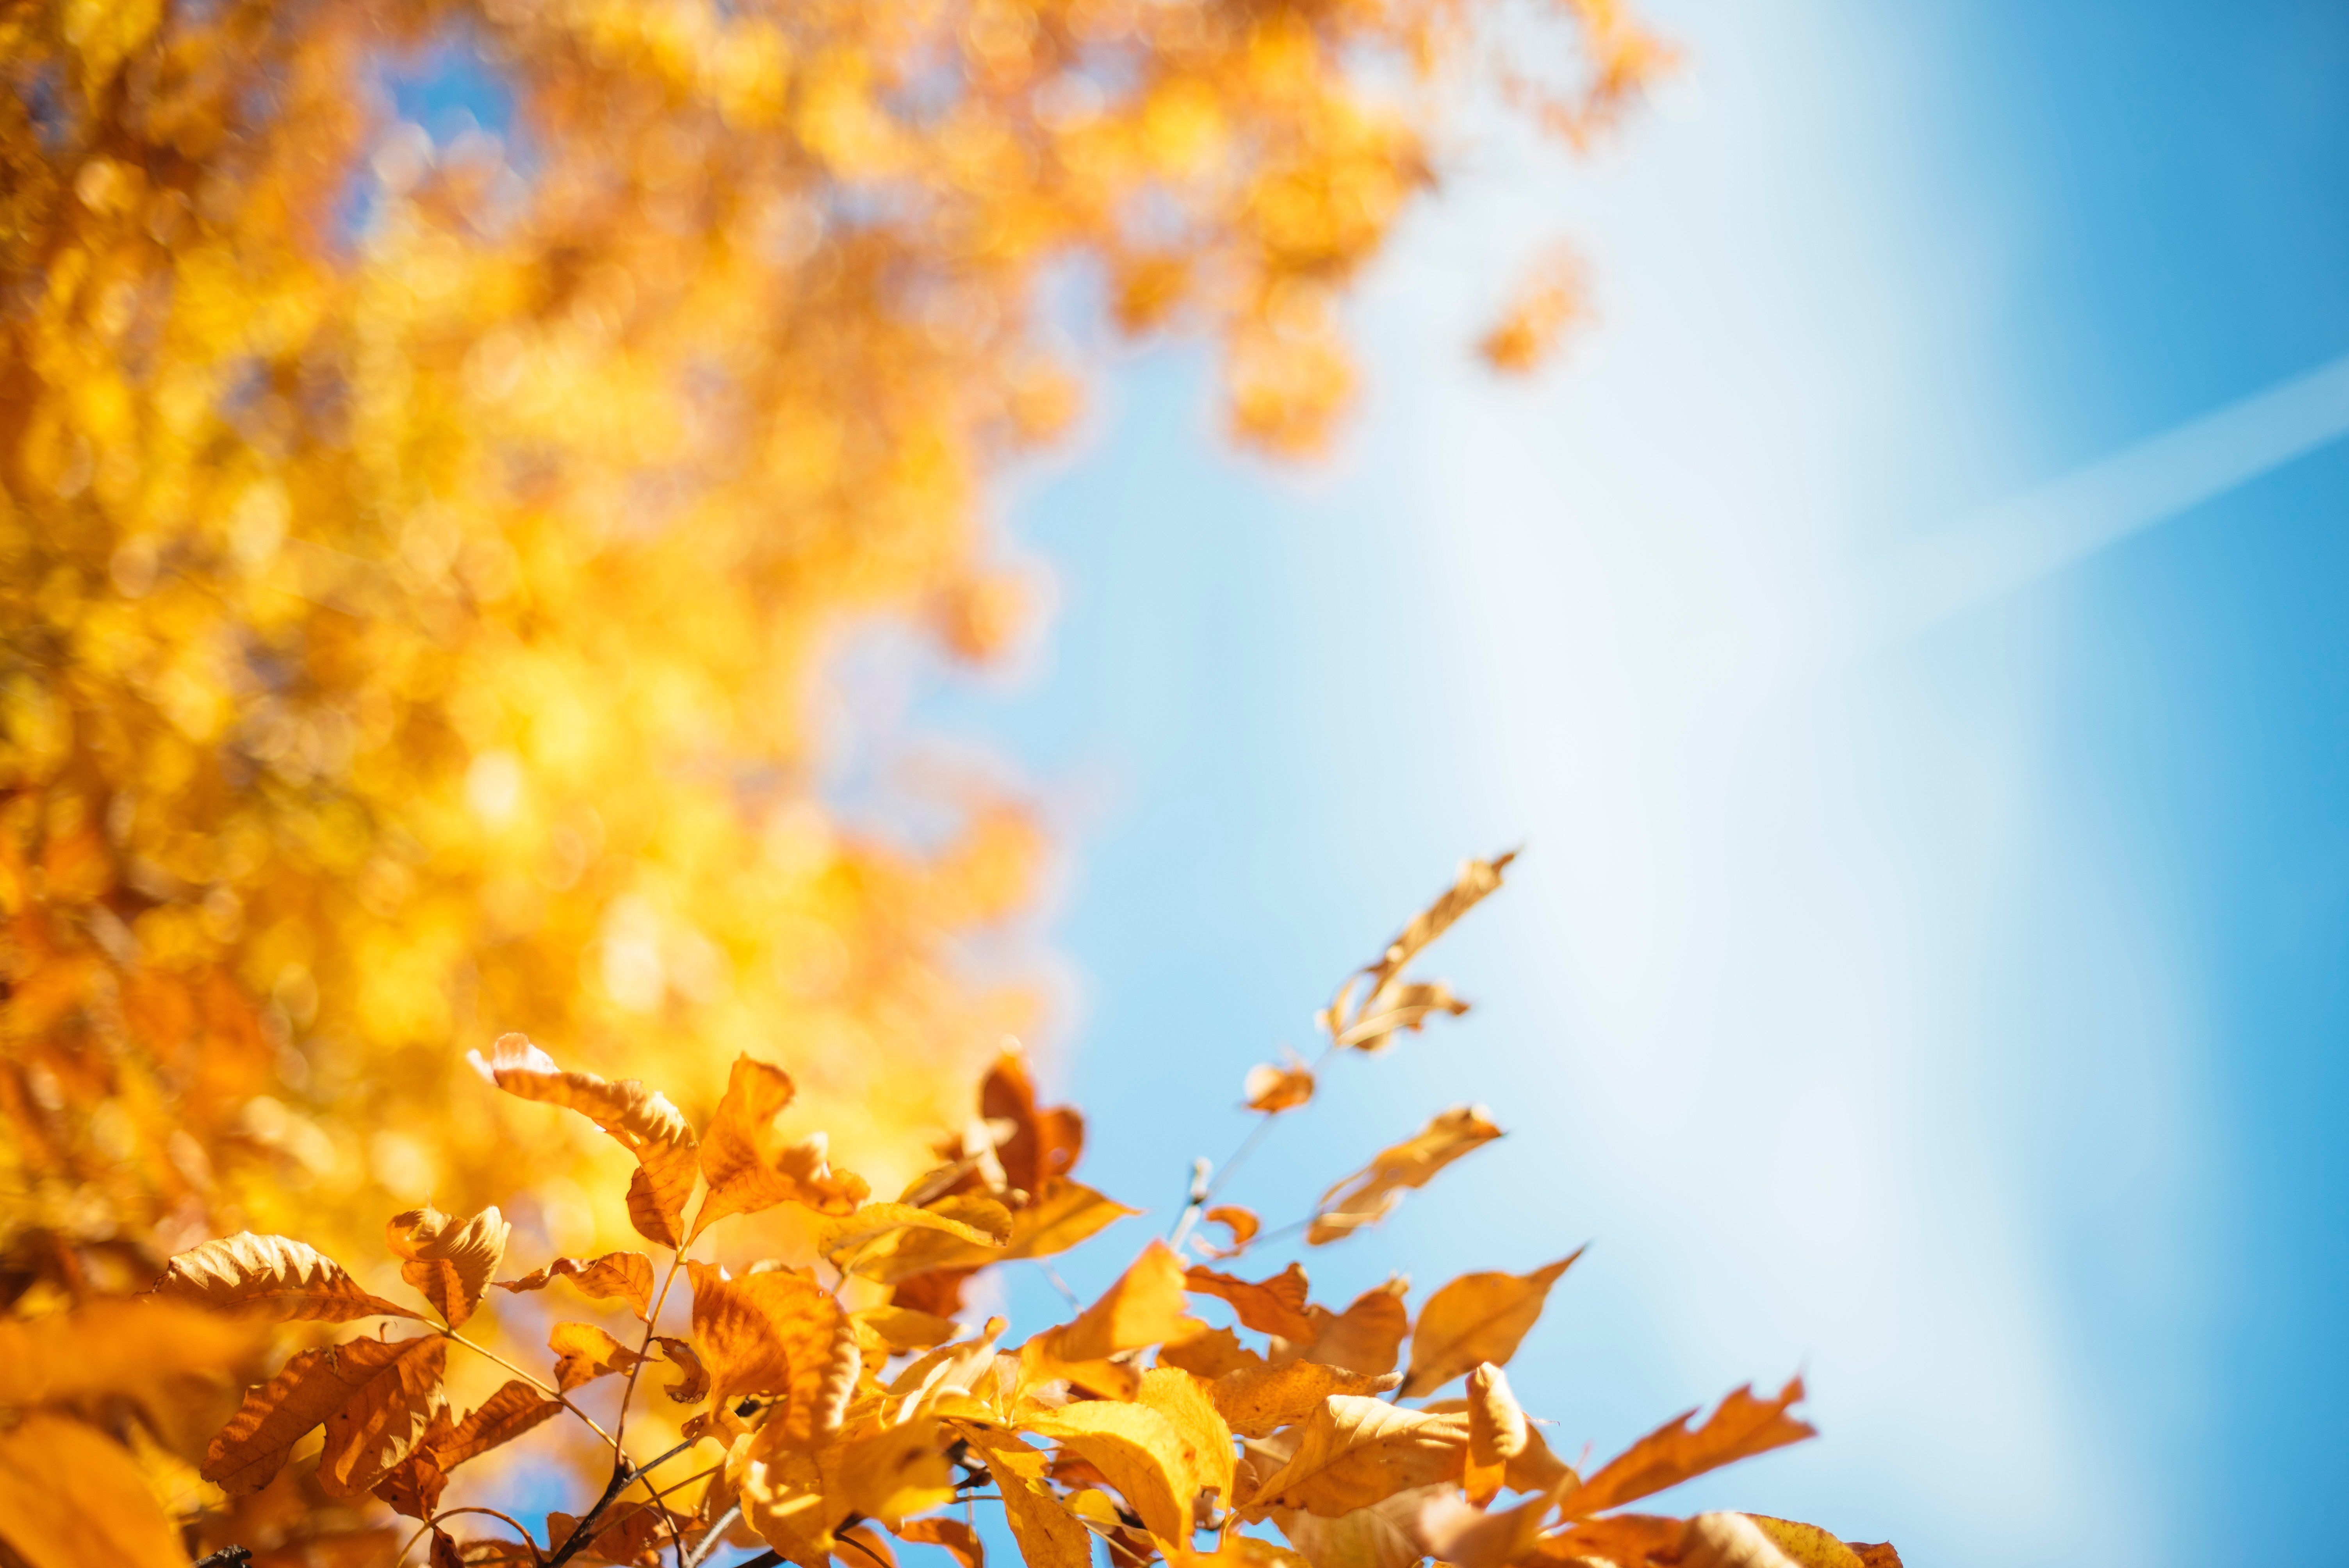 Autumn 4K wallpaper for your desktop or mobile screen free and easy to download